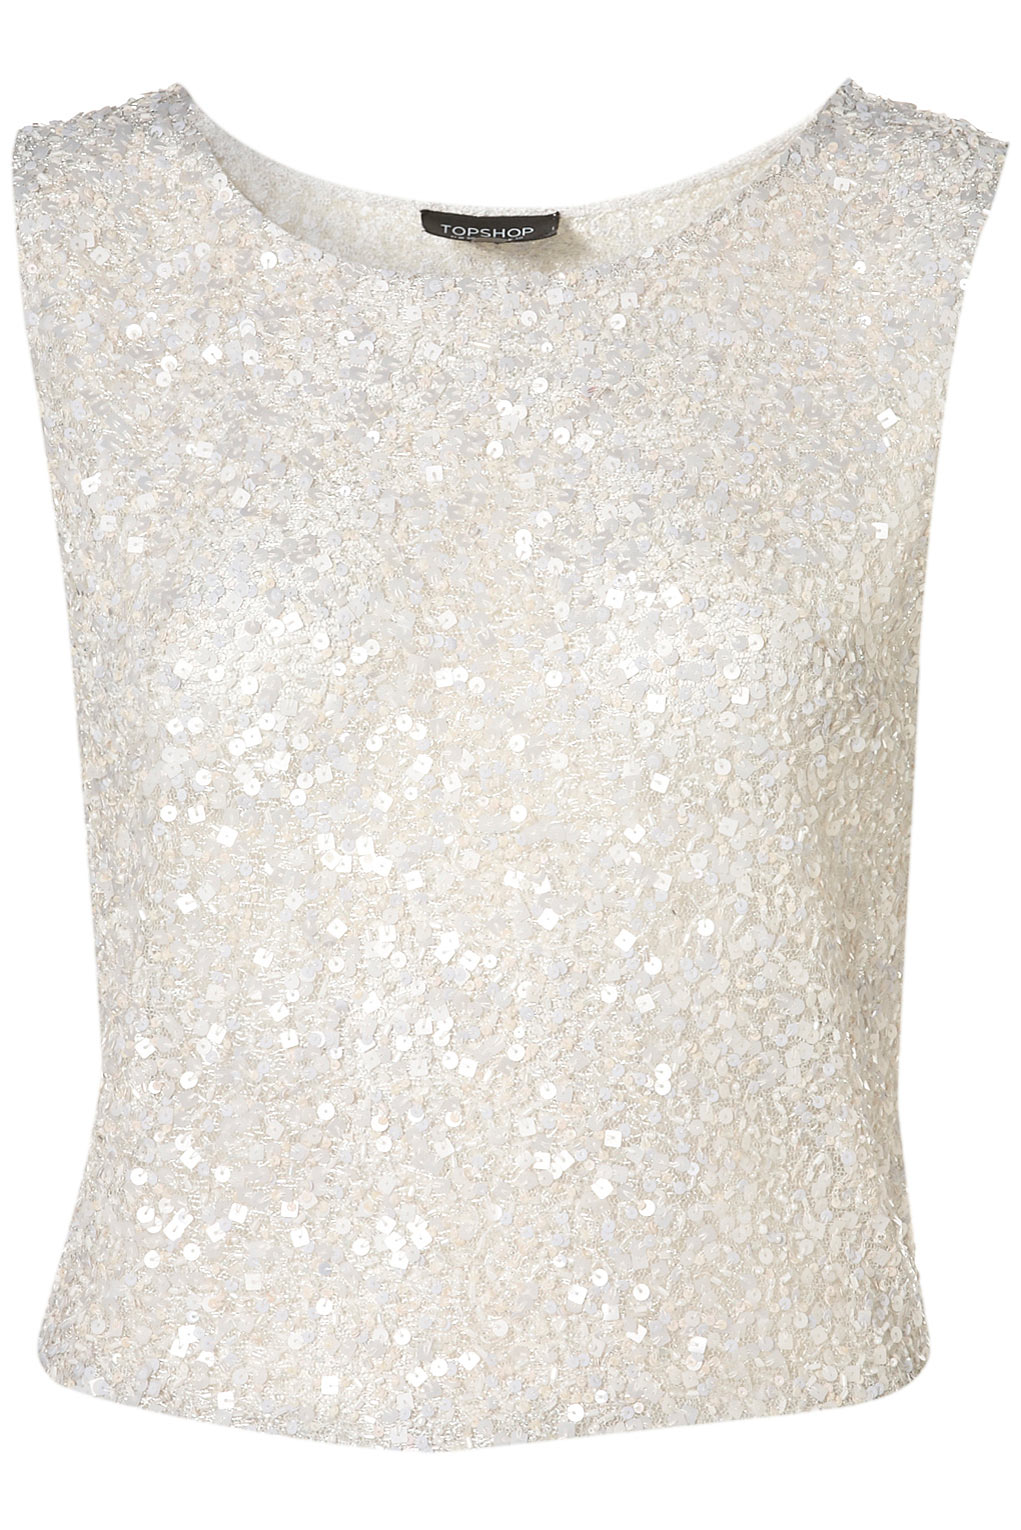 Lyst - Topshop Premium Sequin Shell Top in White